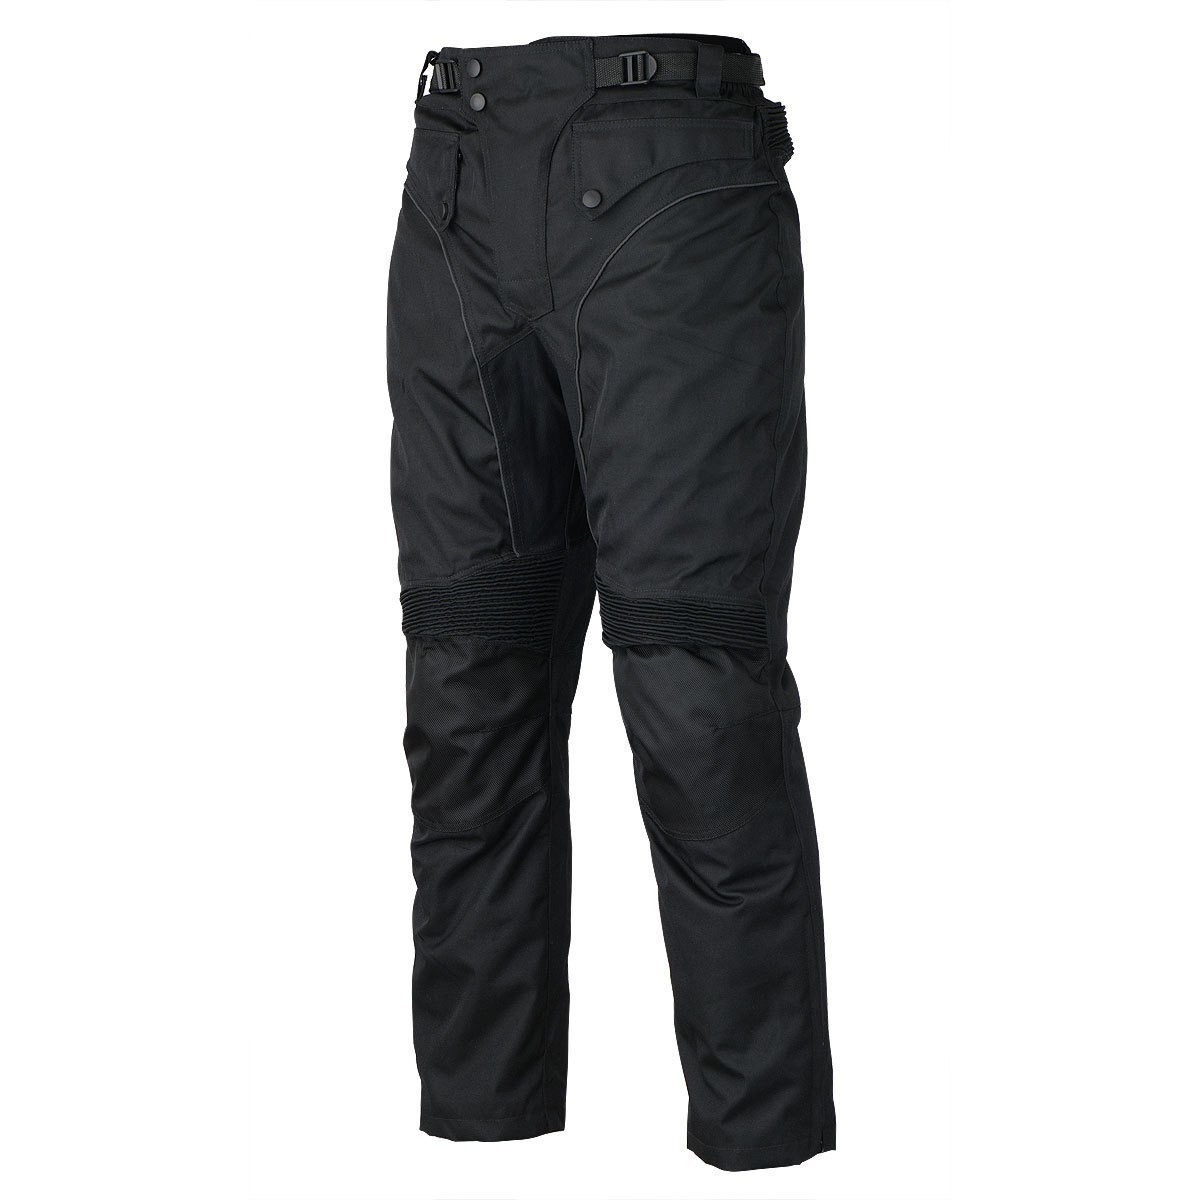 Traveler Pants Properf - Perforated Motorcycle Leather Riding Pants with CE  Approved F.A.S. Armor